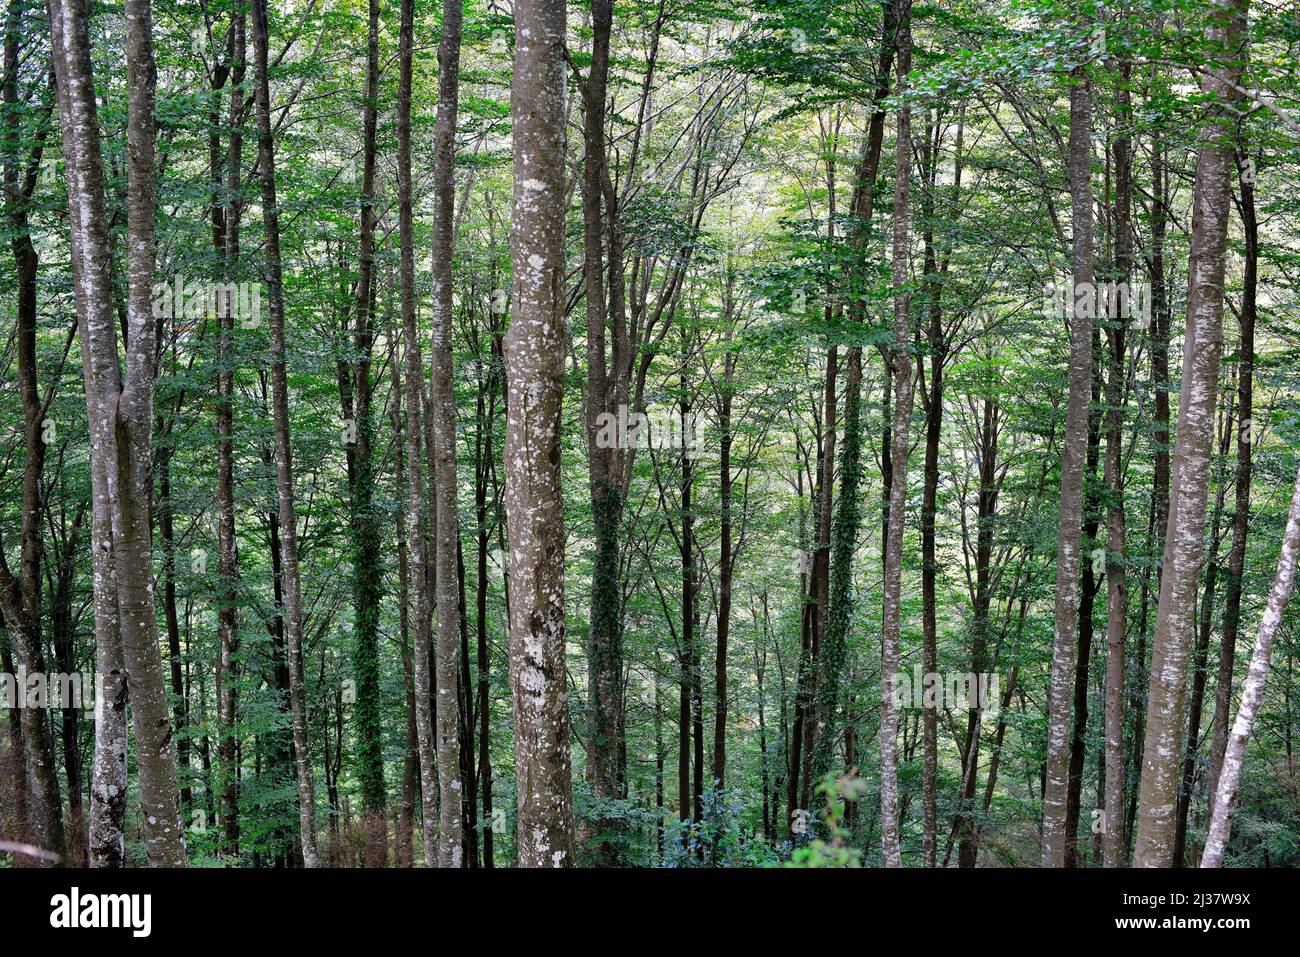 European beech (Fagus sylvatica) is a deciduous tree native to central Europe and southern Europe mountains. This photo was taken in La Fageda de la Stock Photo